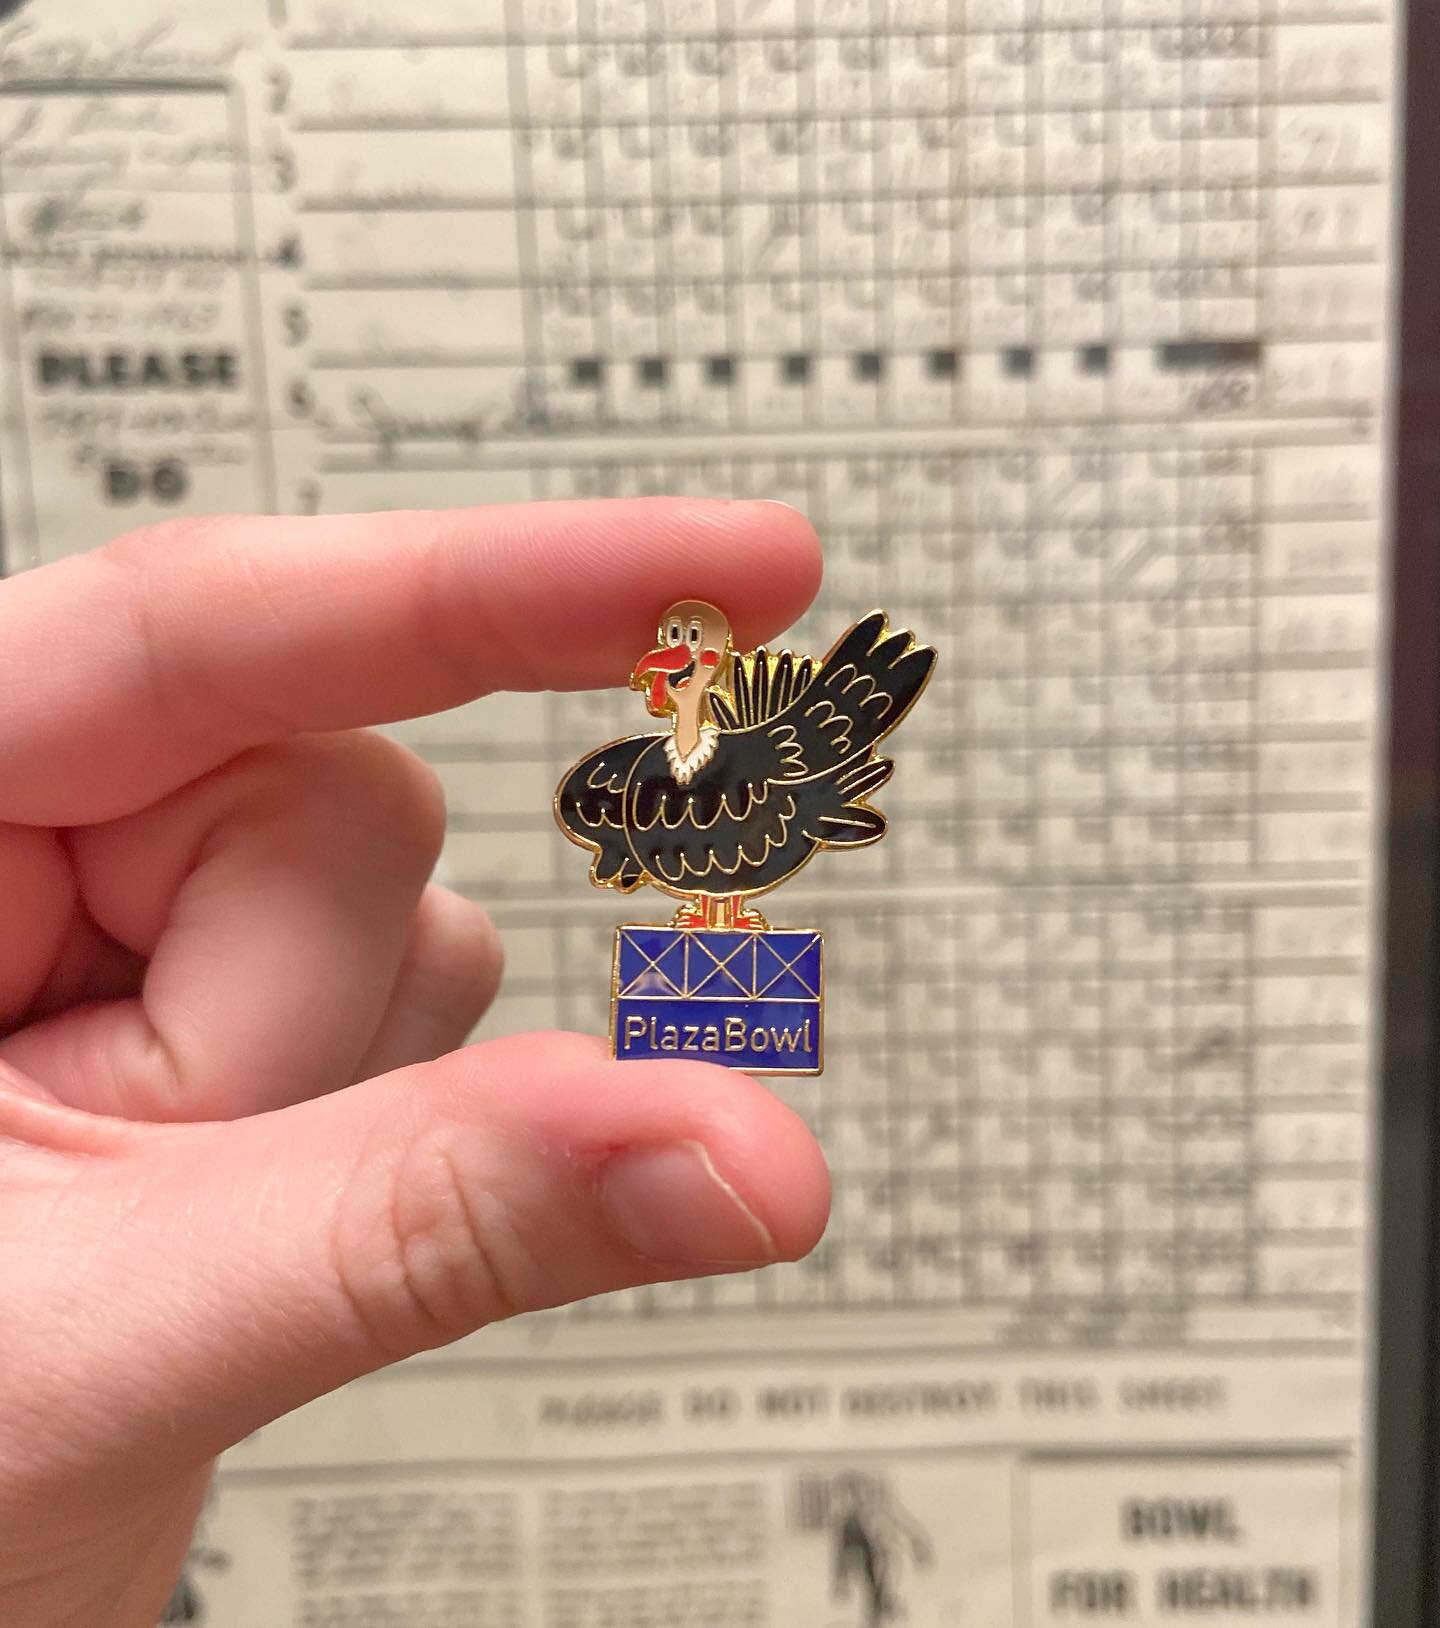 Say hello to our first ever custom turkey pin! 🦃 Designed by @madebybunnzers , you can earn this little guy by bowling 3 strikes in a row! 

If you get our gobbling guy, the team at plaza recommends you pop it on a denim jacket and brag to all your 